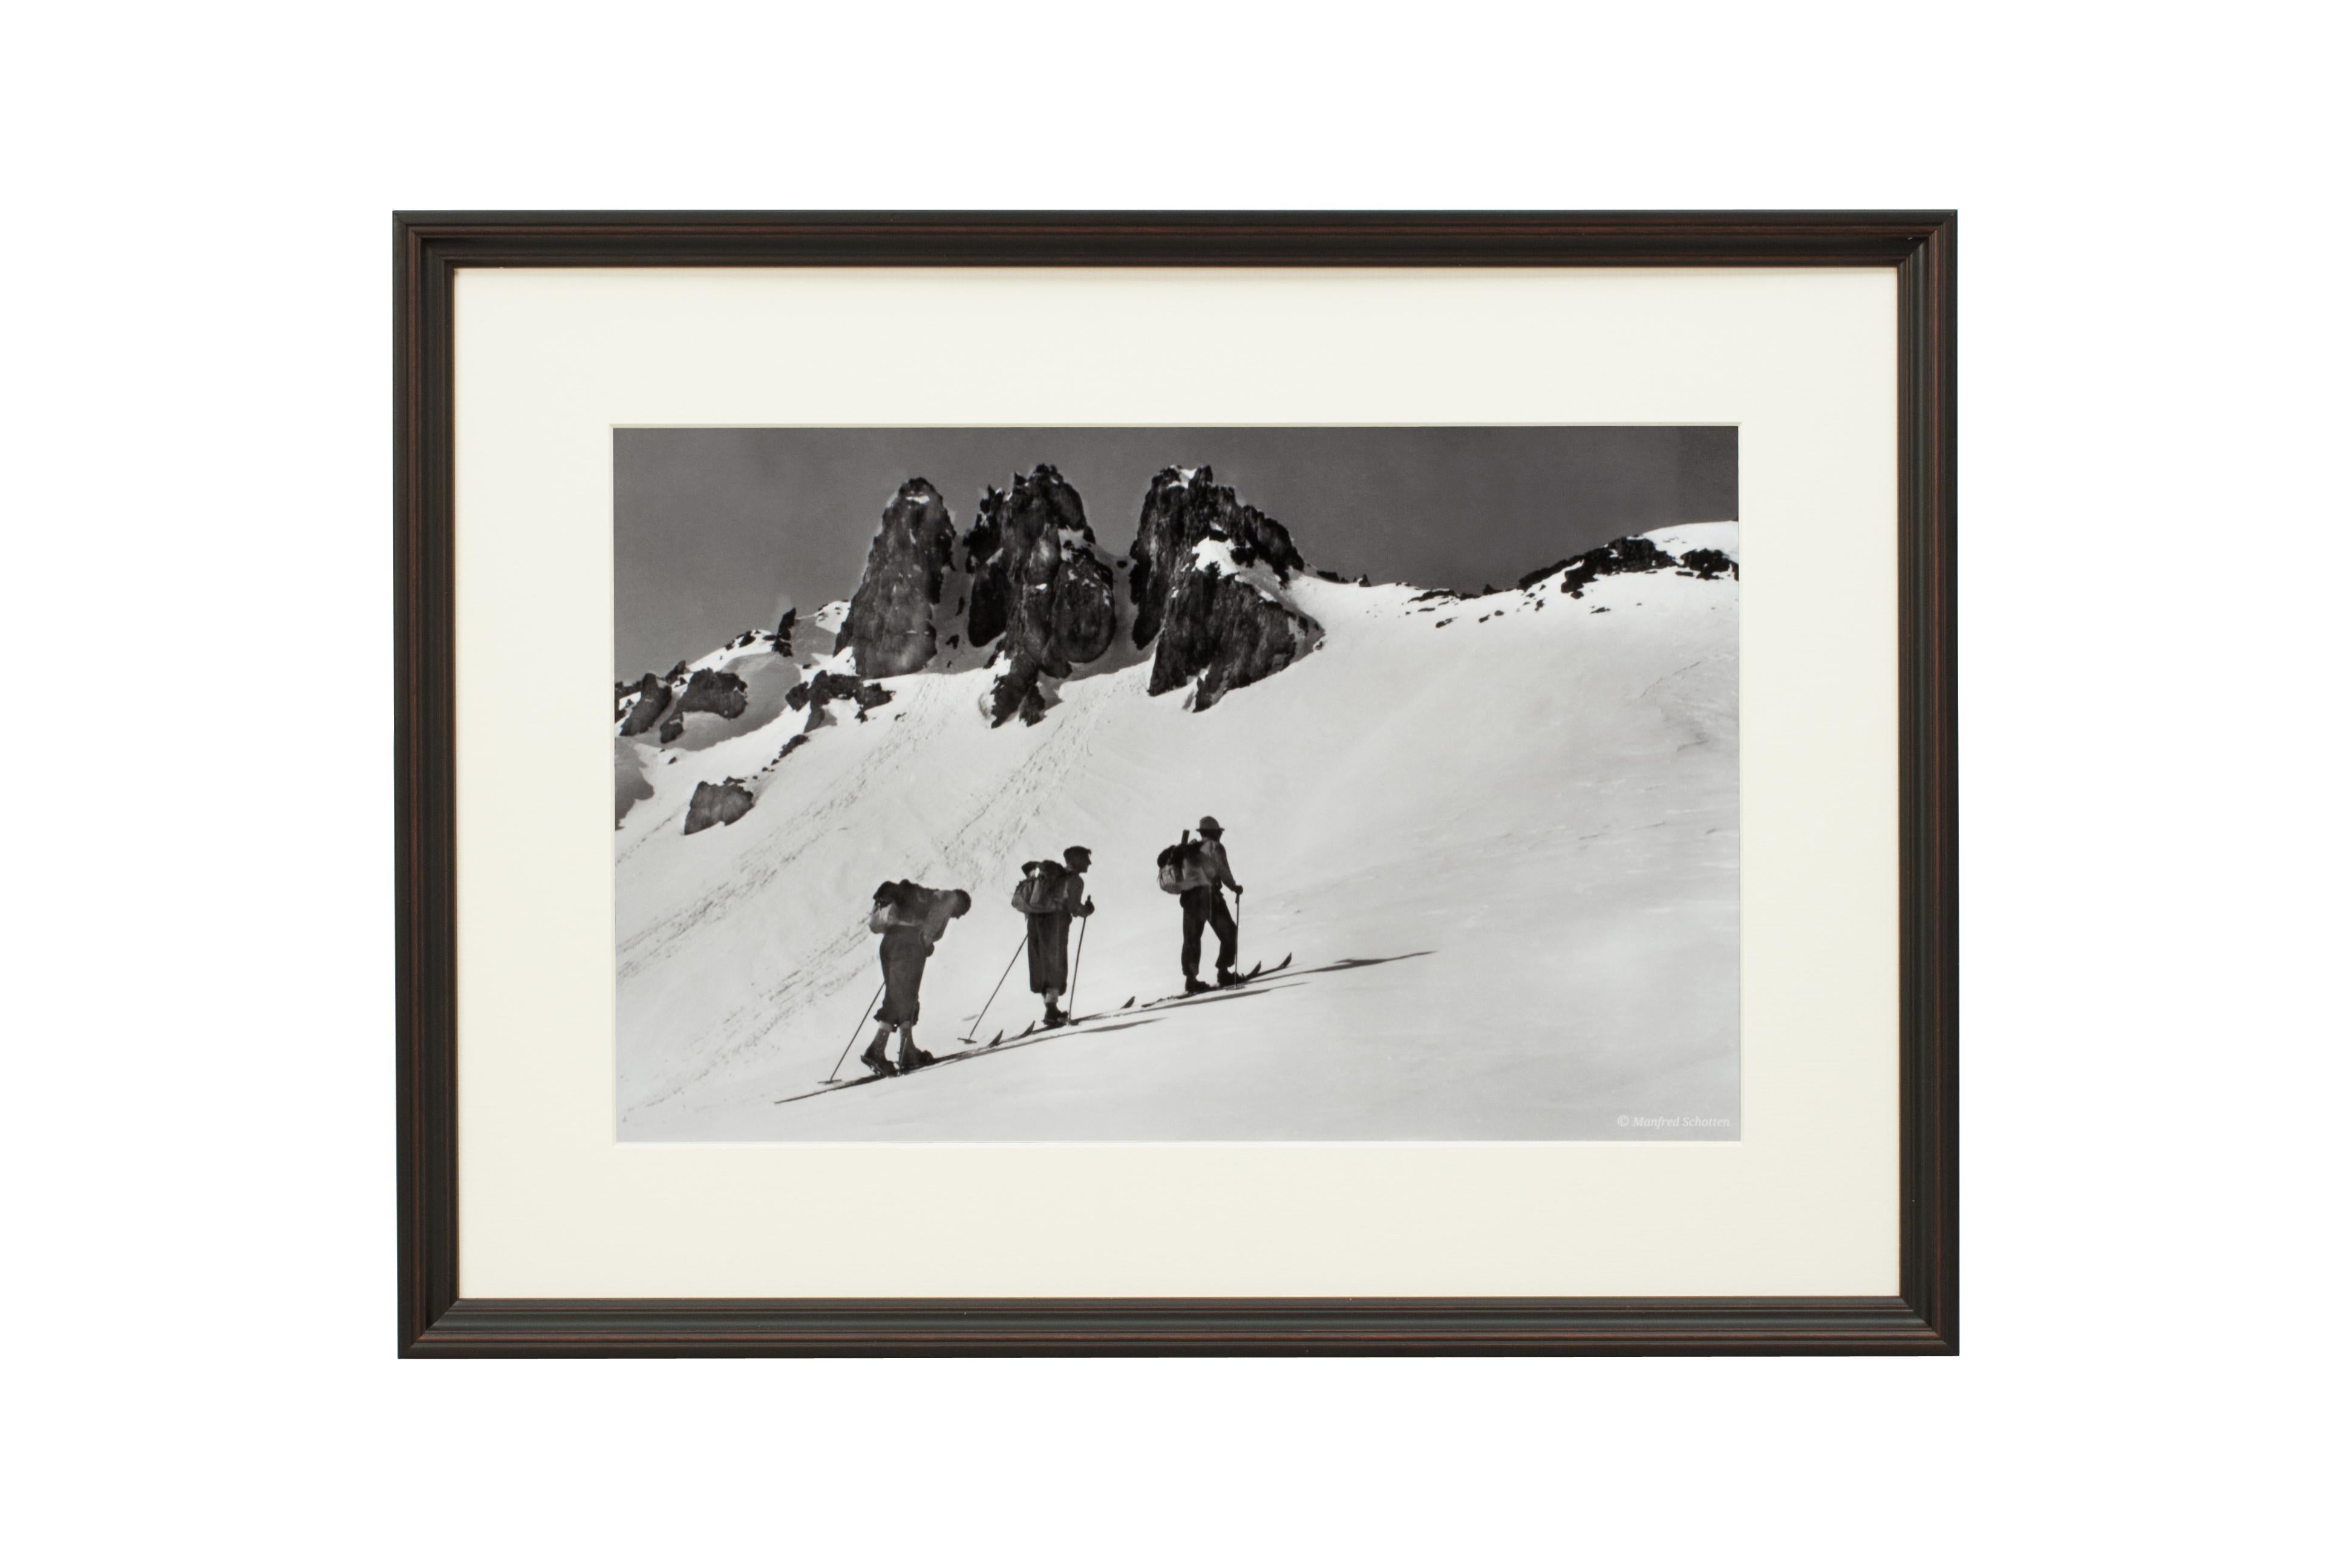 'THREE PEAKS', a modern framed and mounted black and white photograph after an original 1930's skiing photograph. The frame is black with a burgundy undercoat, the glazing is clarity+ premium synthetic glass. Black & white alpine photos are the